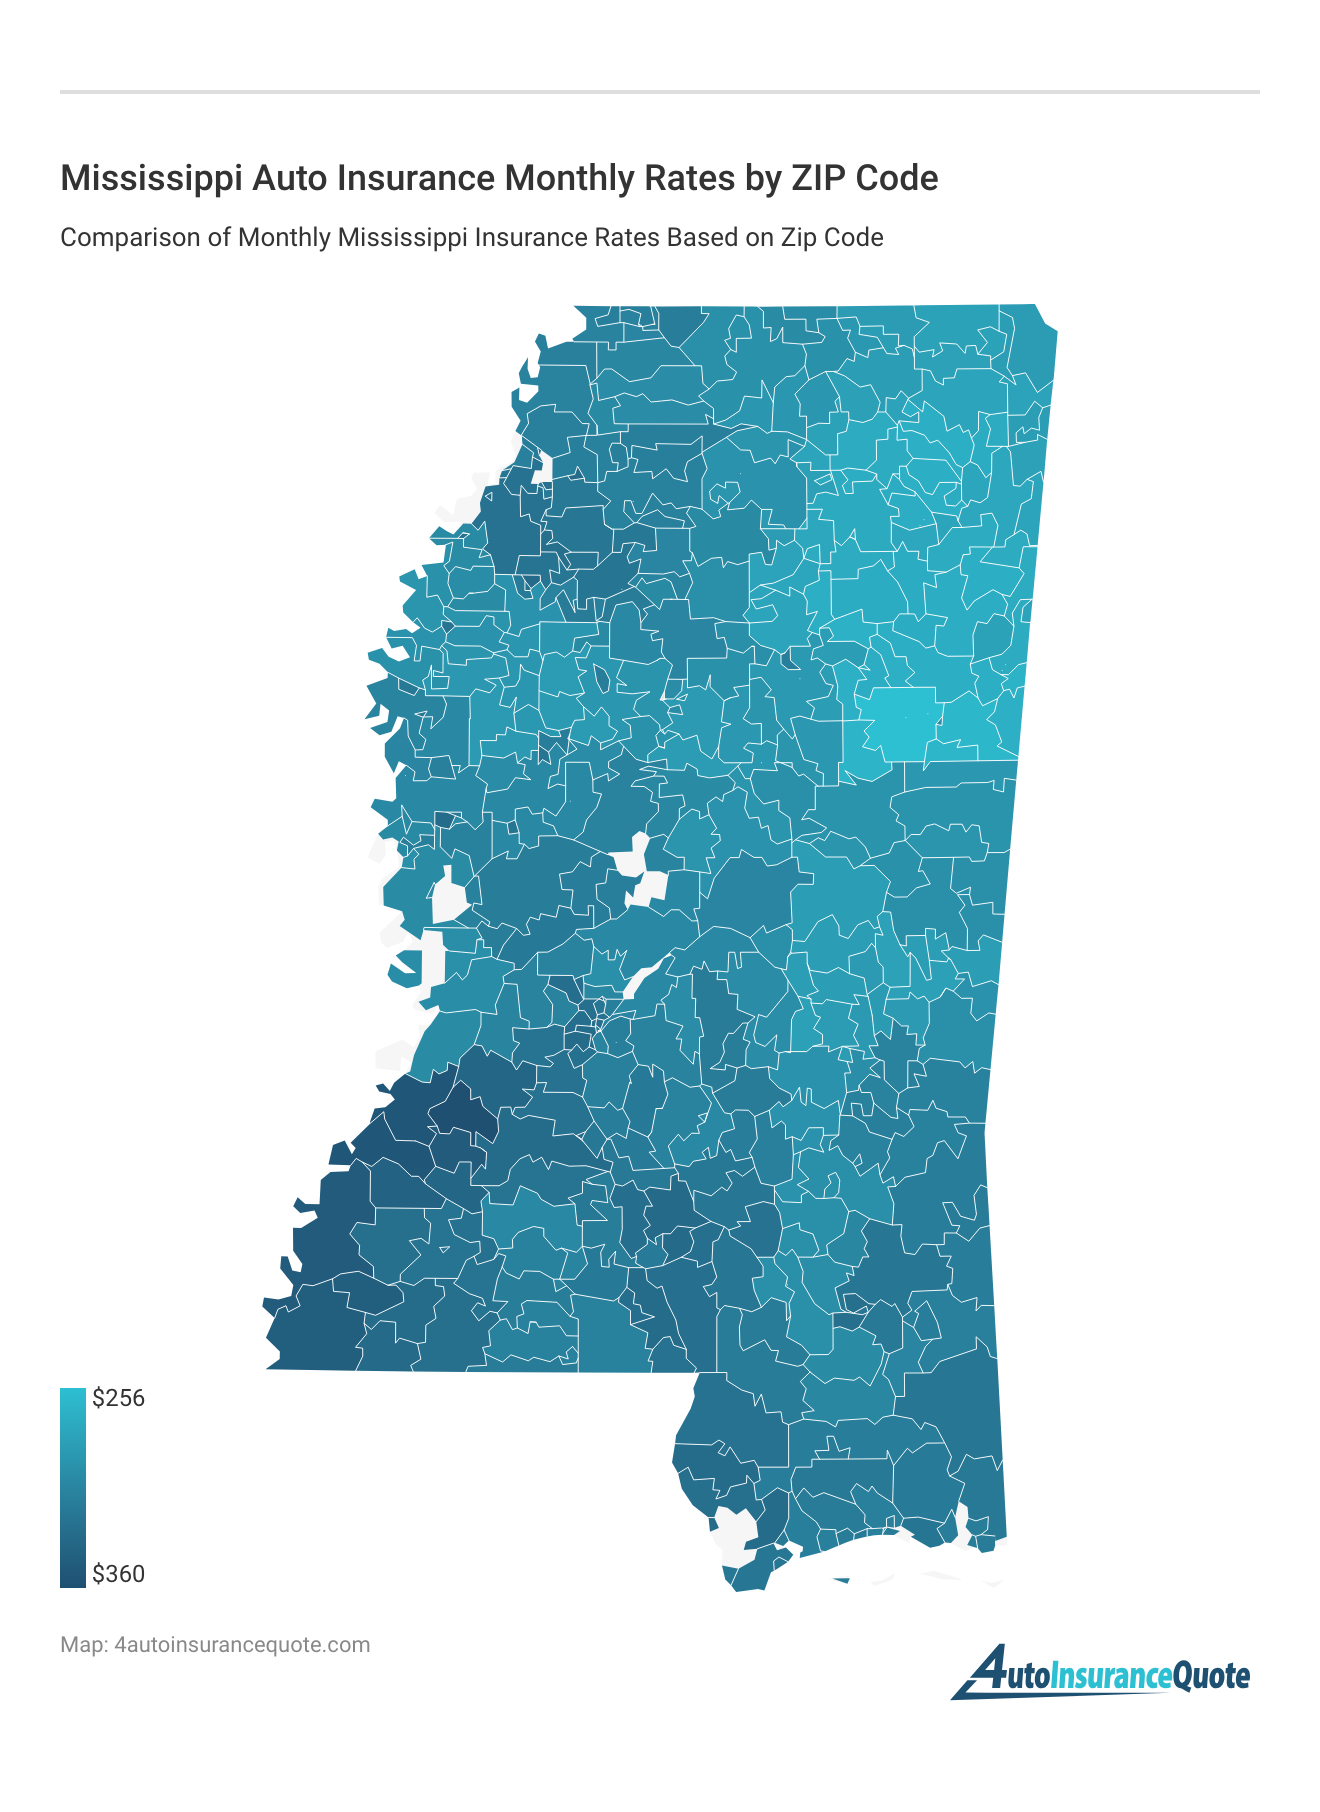 <h3>Mississippi Auto Insurance Monthly Rates by ZIP Code</h3>